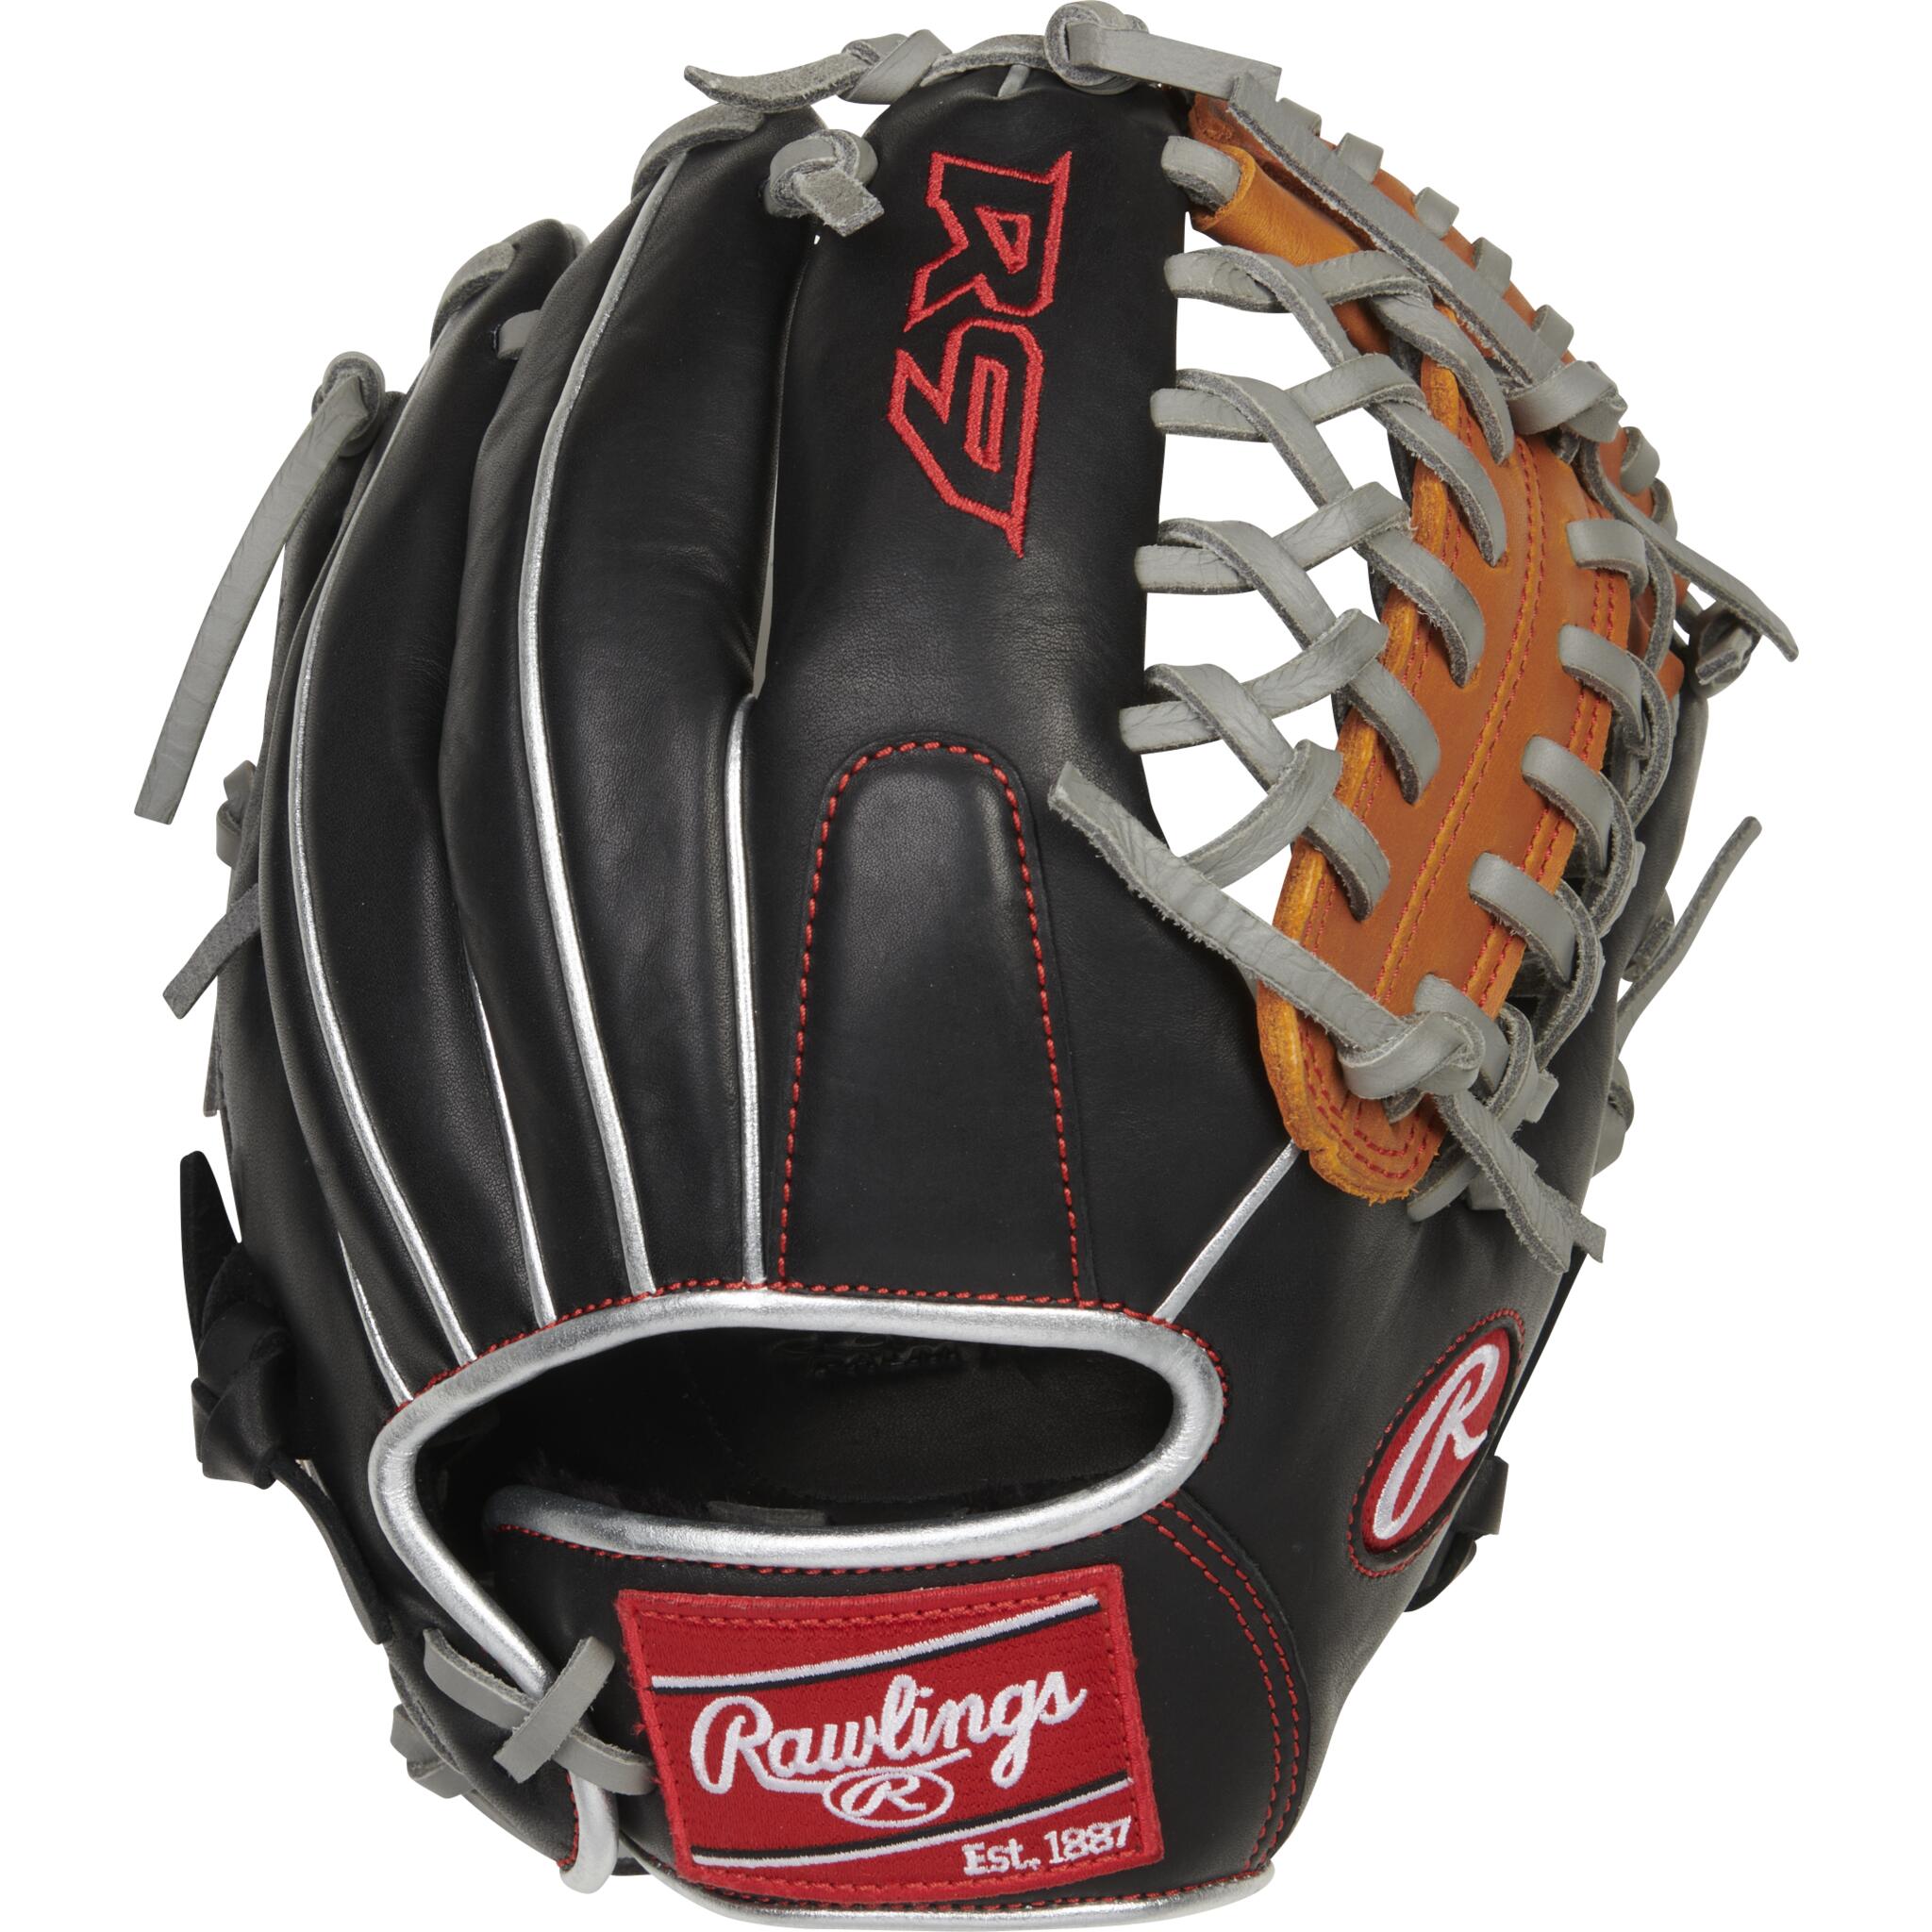 Rawlings Sure Catch 10-inch Glove - Jacob deGrom | Right Hand Throw |  Infield/Pitcher